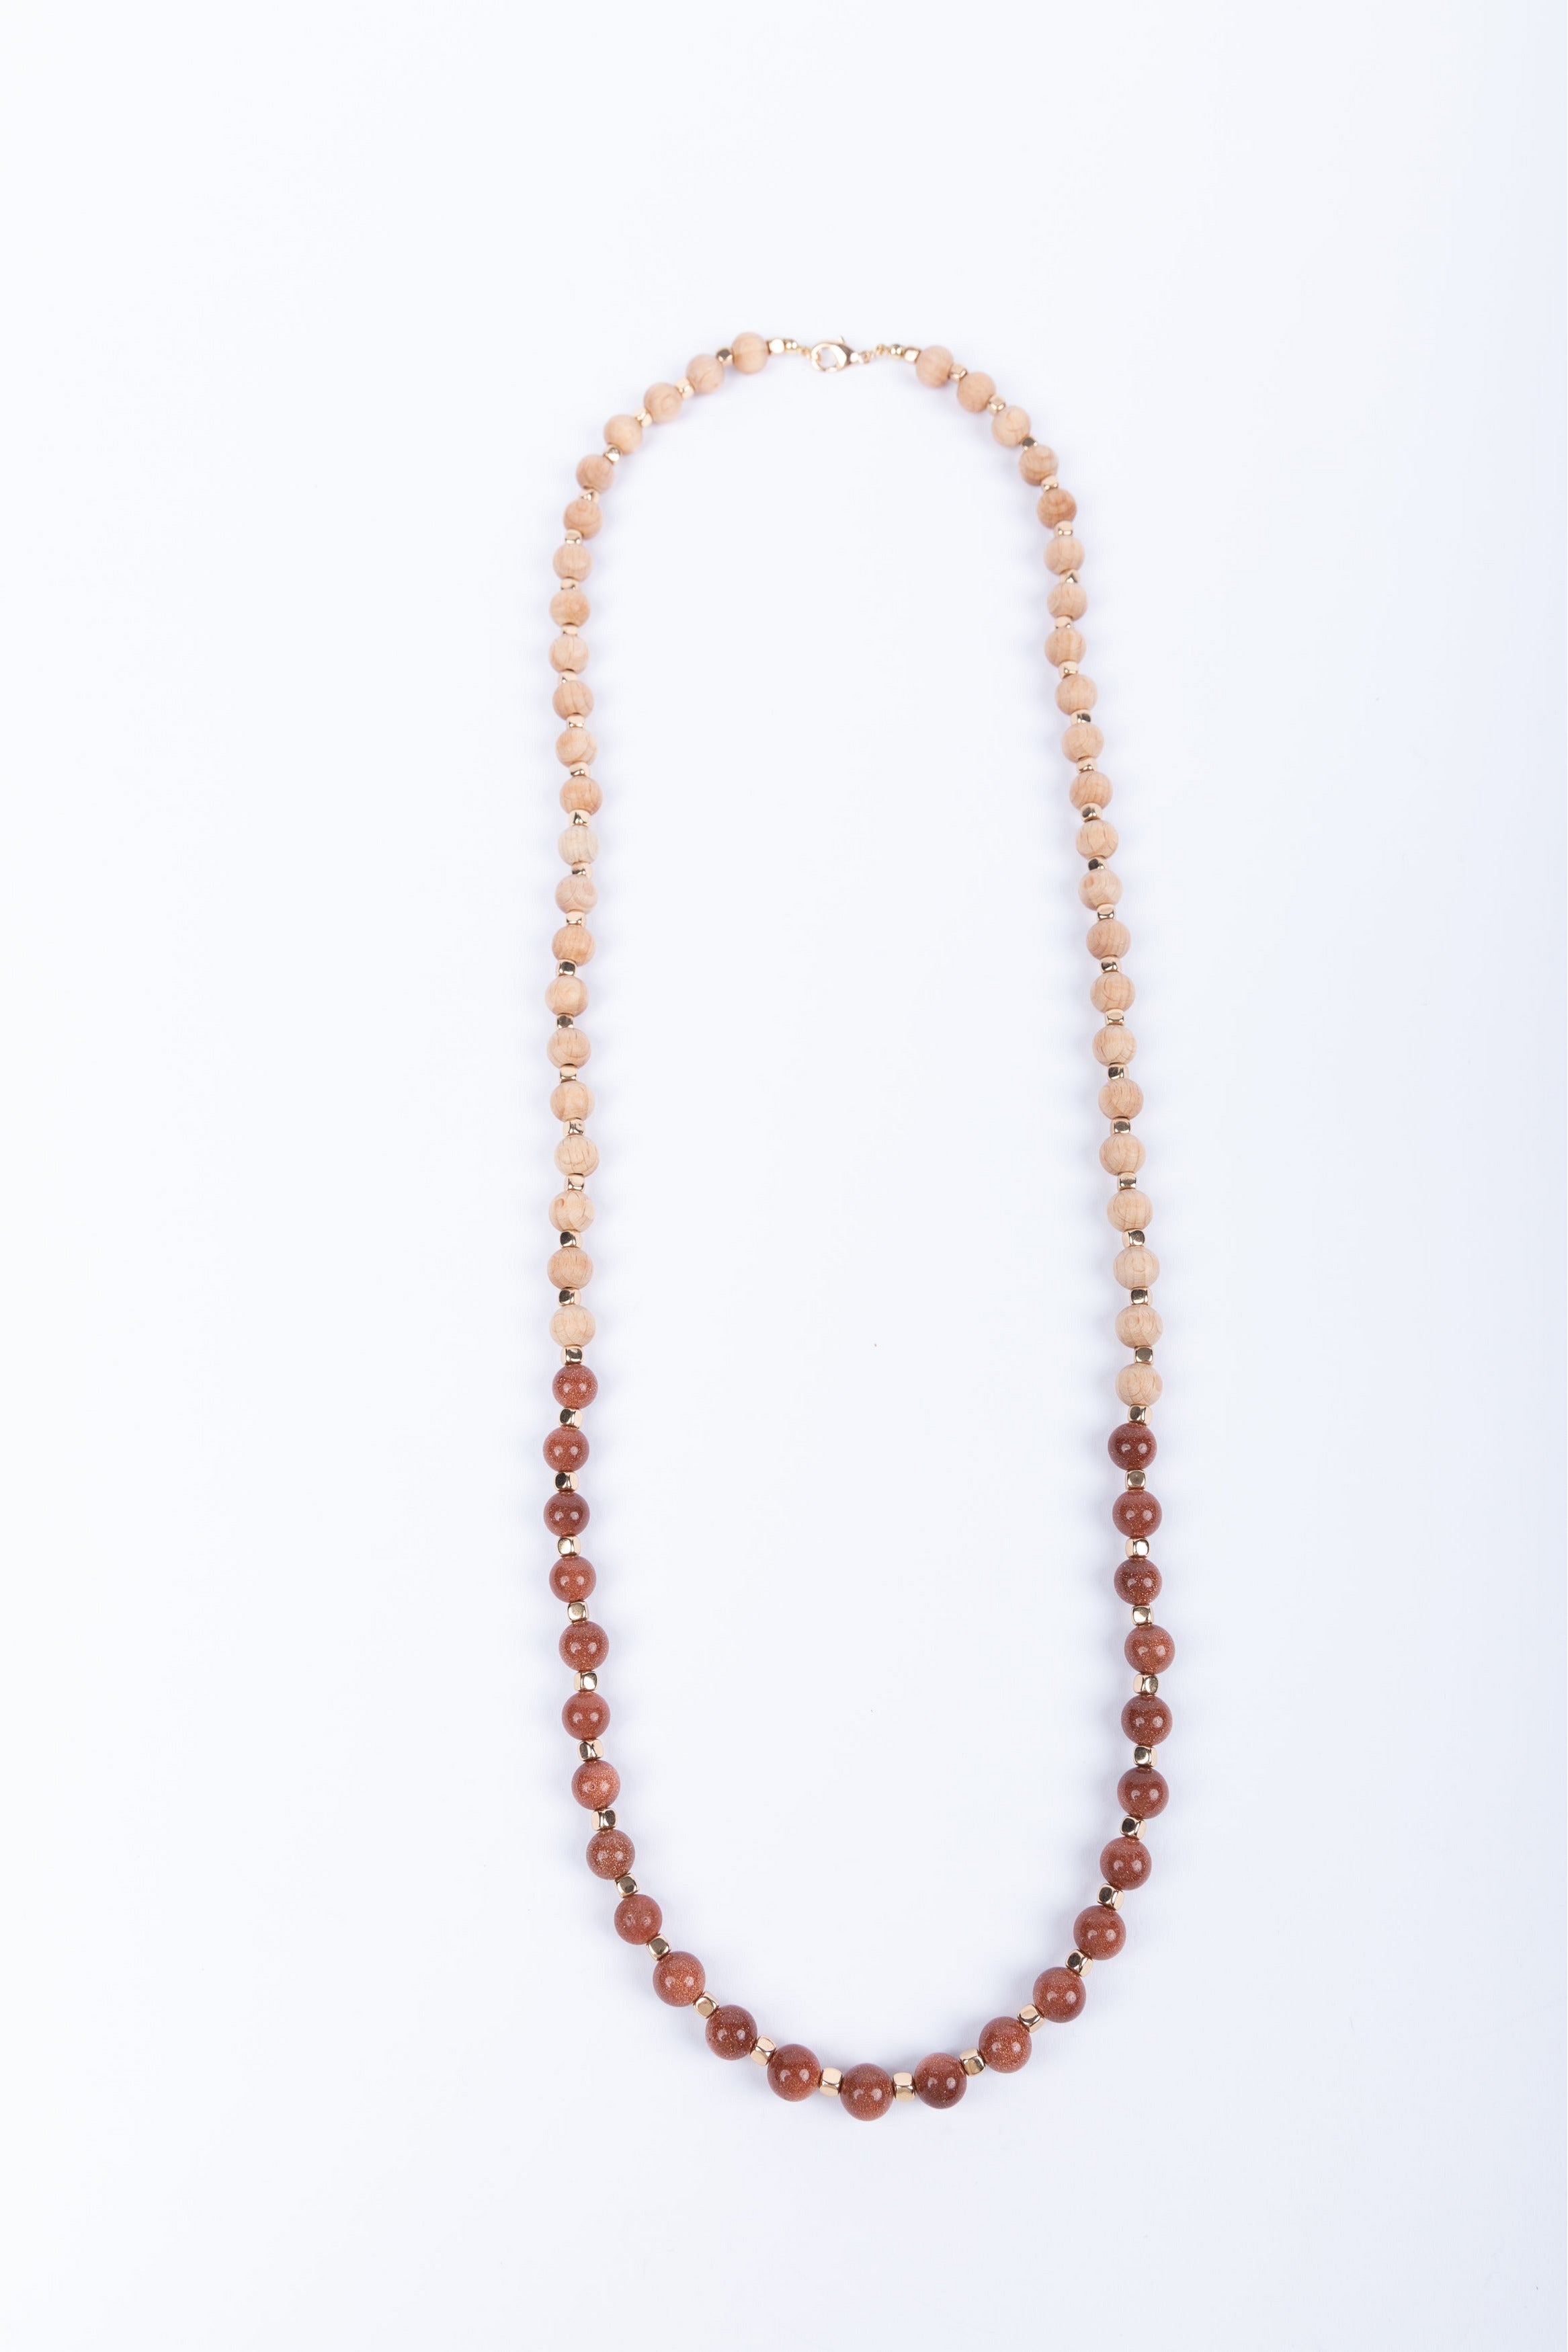 Sunset Necklace - Black, Ice and Rust